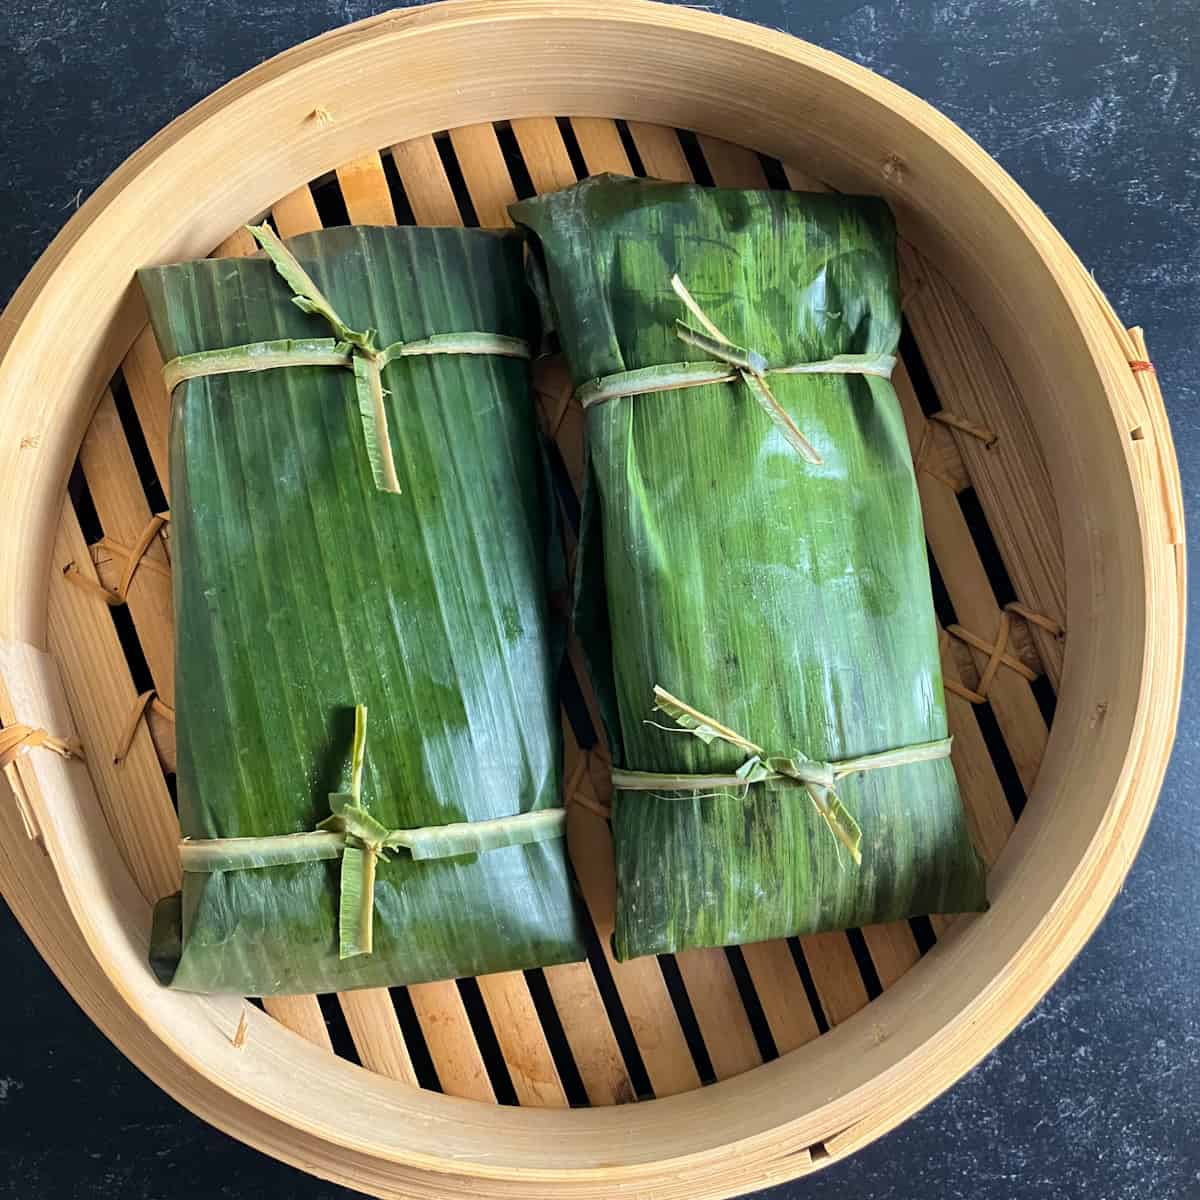 steamed fish in banana leaves